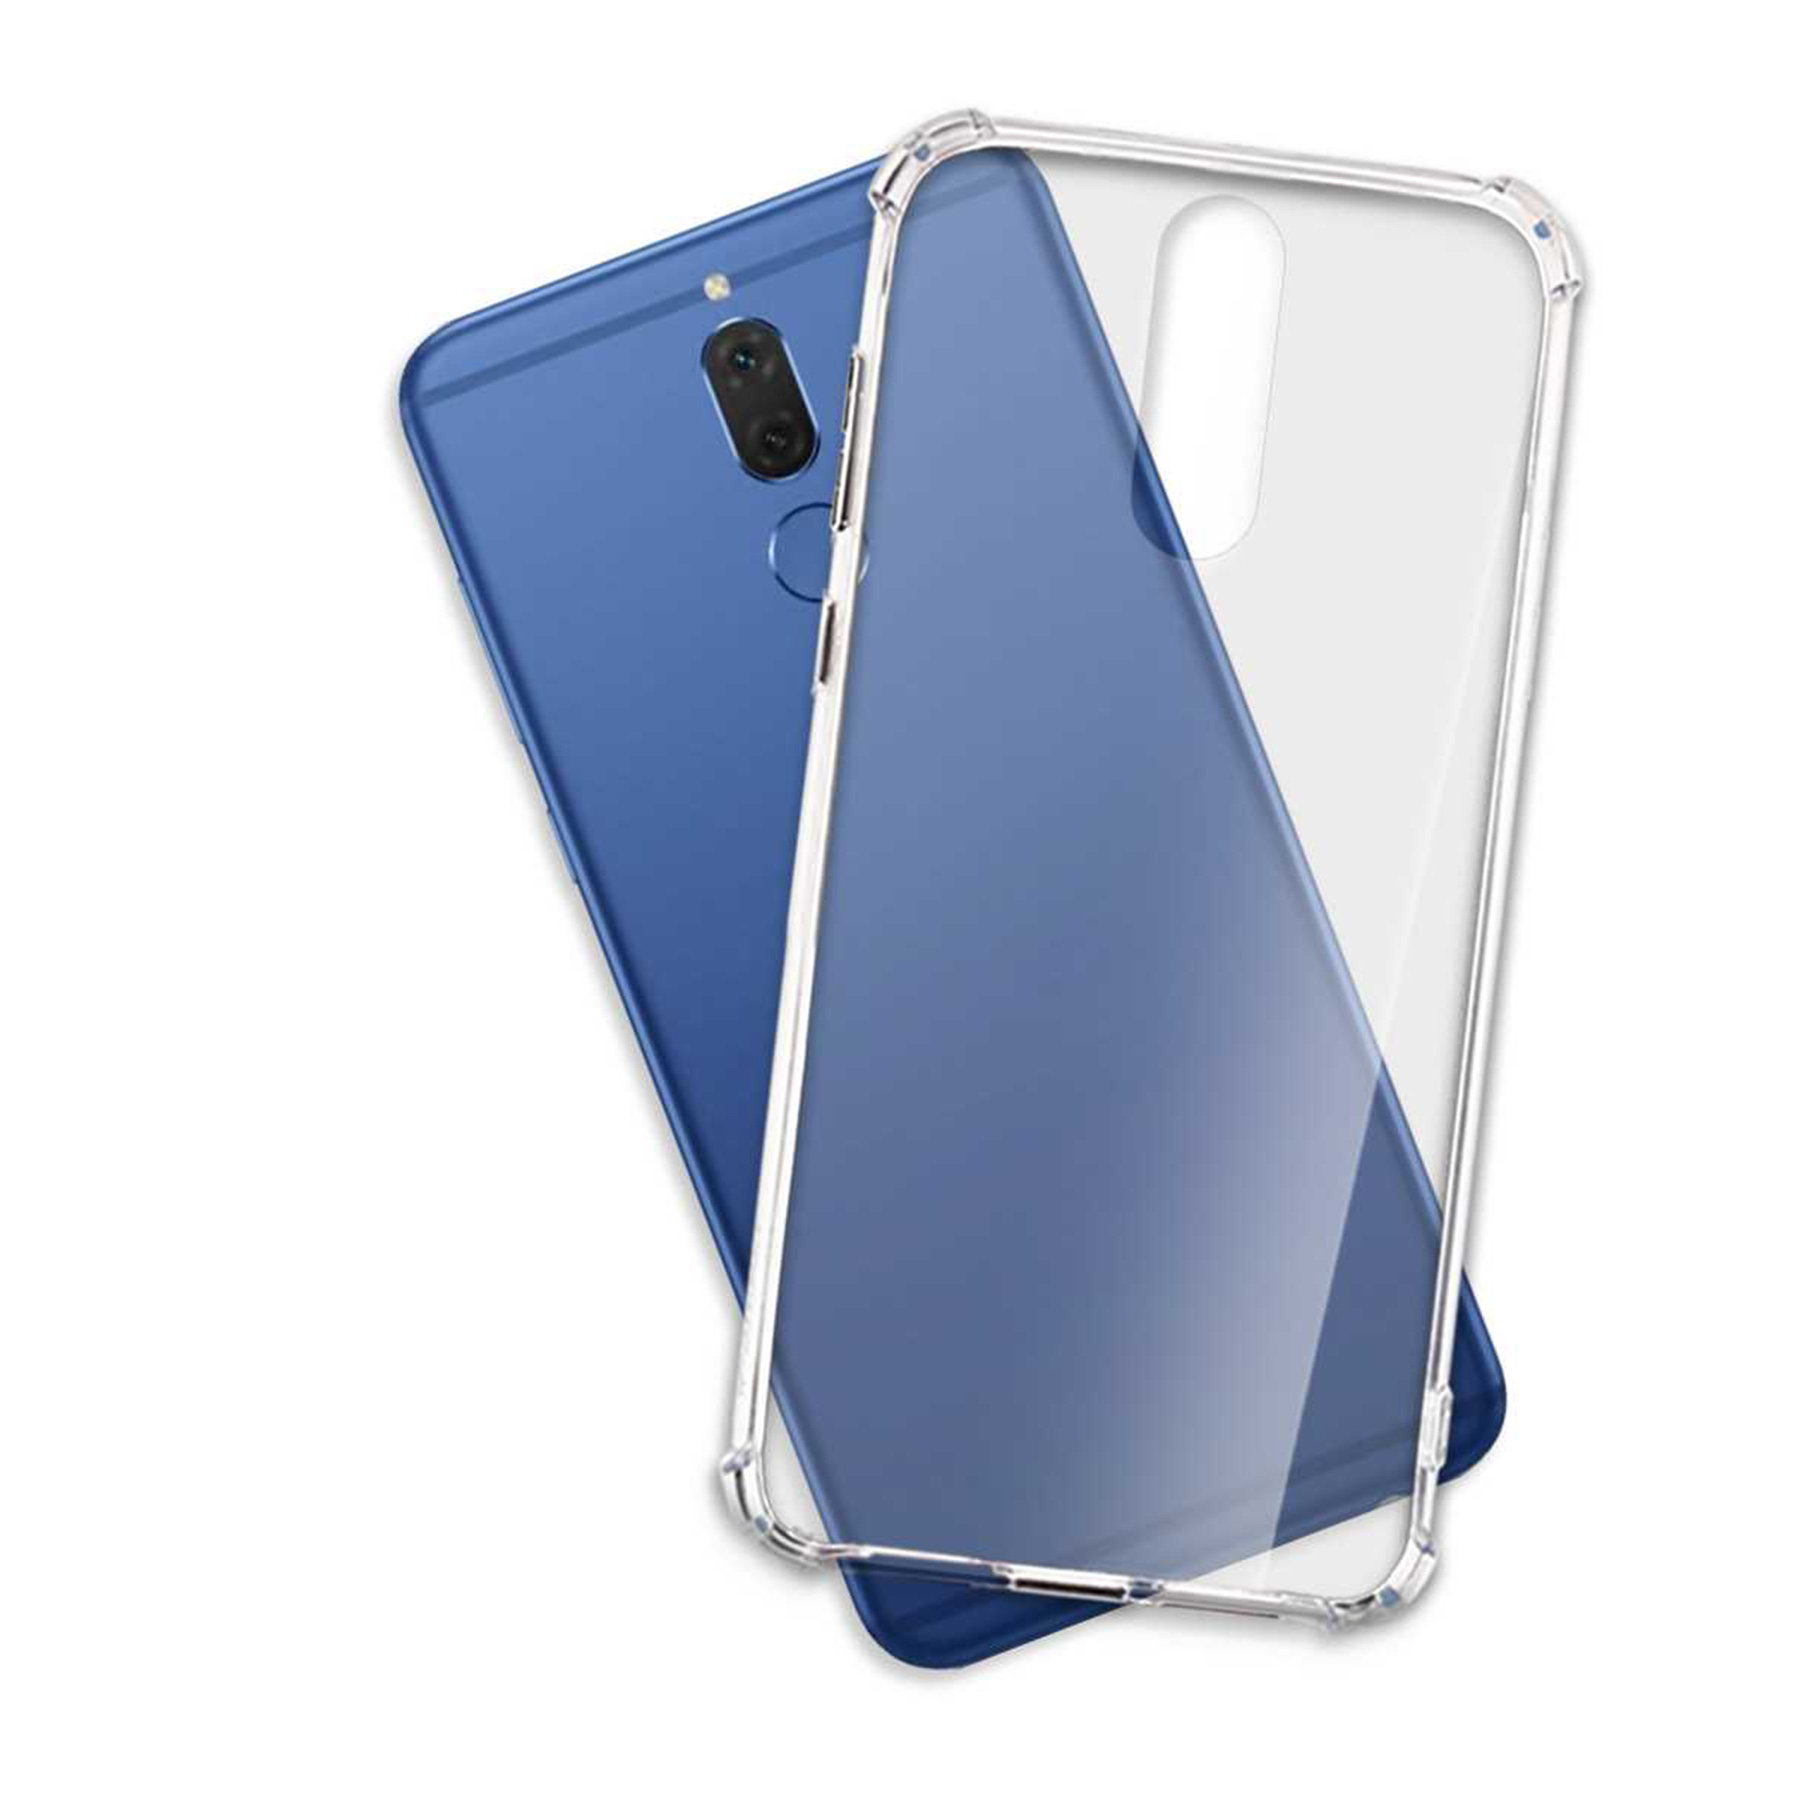 Huawei, ENERGY Backcover, Transparent Armor 10 MTB Clear Lite, MORE Case, Mate